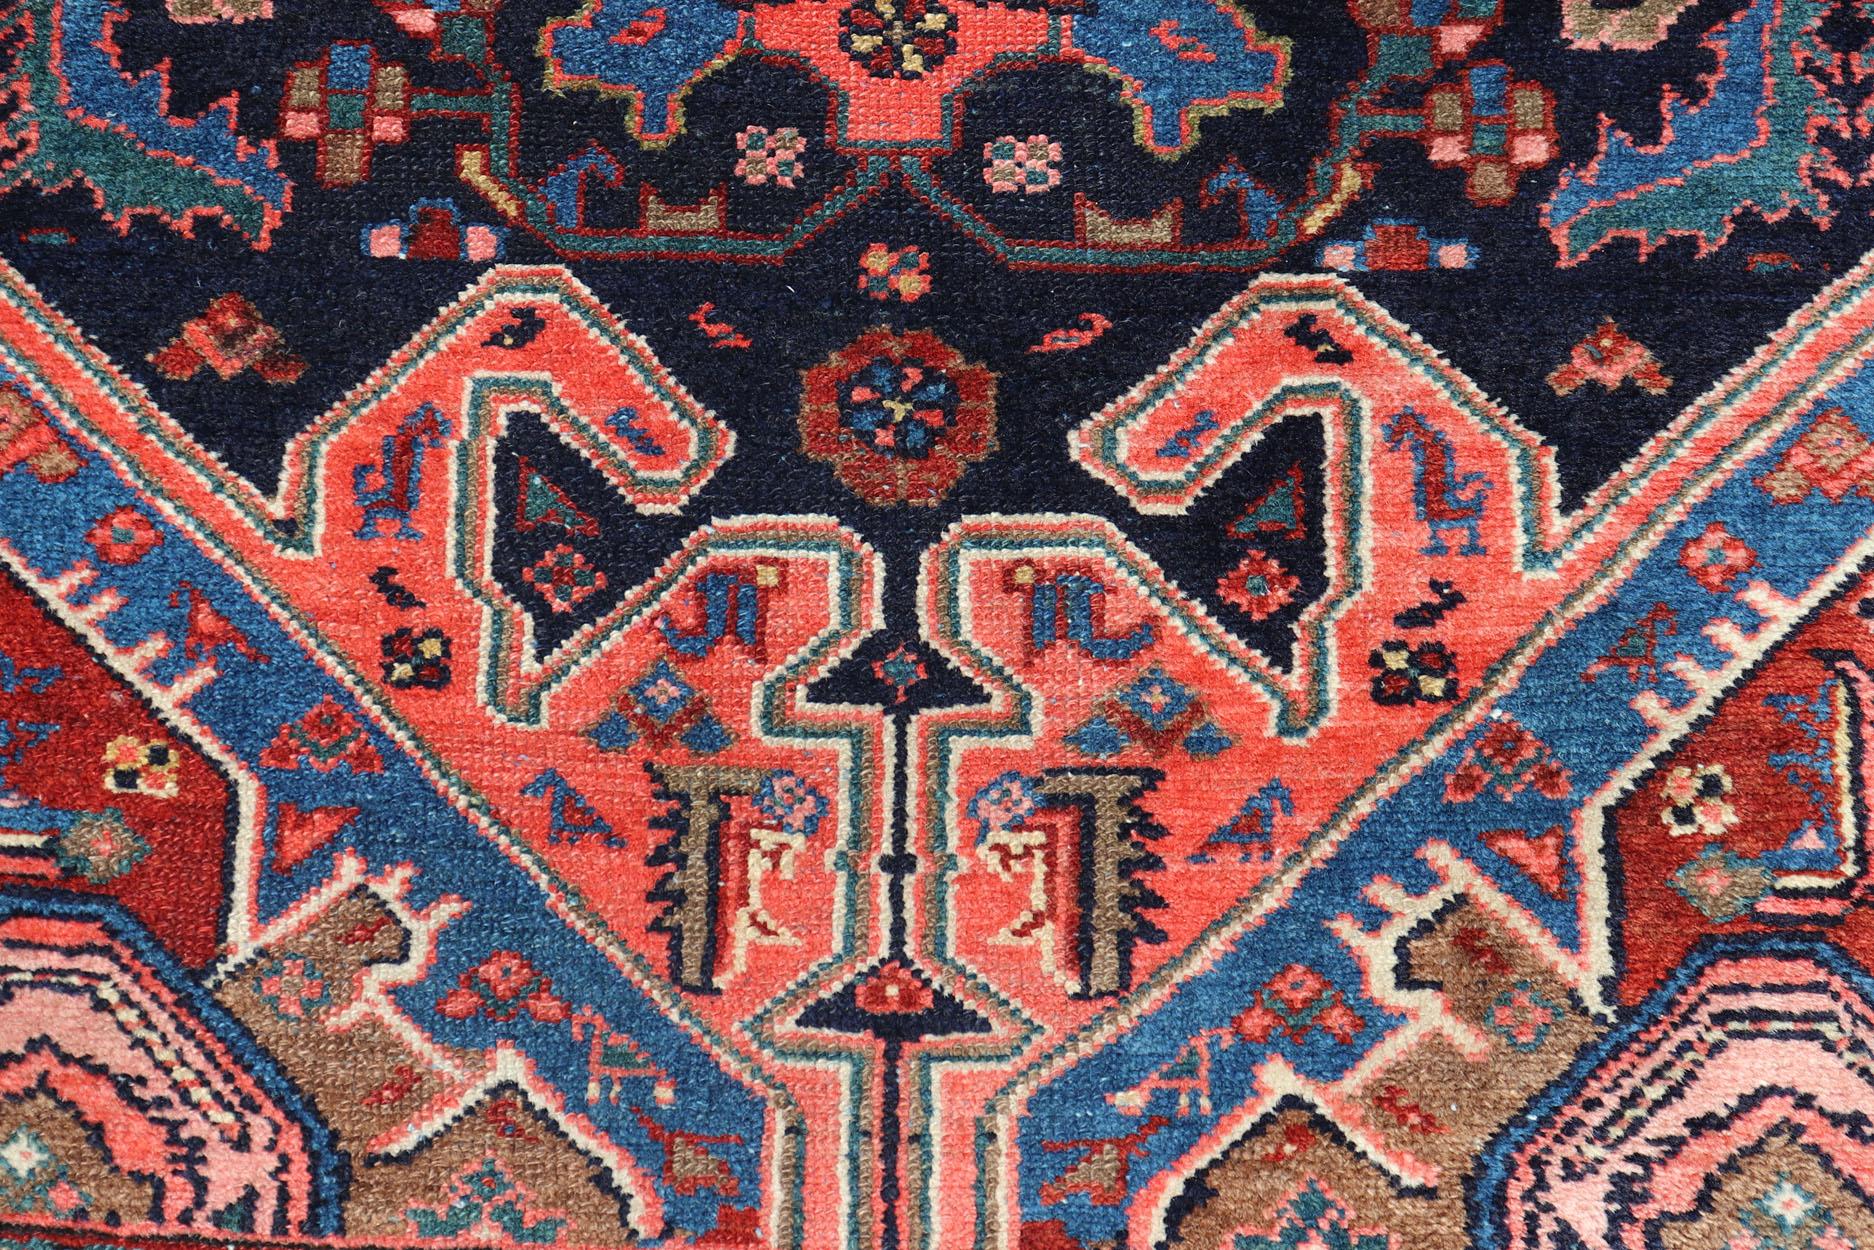 Measures: 3'5 x 16'4 

This 1930's Persian Malayer runner features vivid shades of navy, blue, red-orange, green and small accents in camel, pink, and ivory. The field design is a unique palm leaf motif design scattering across the entirety of the